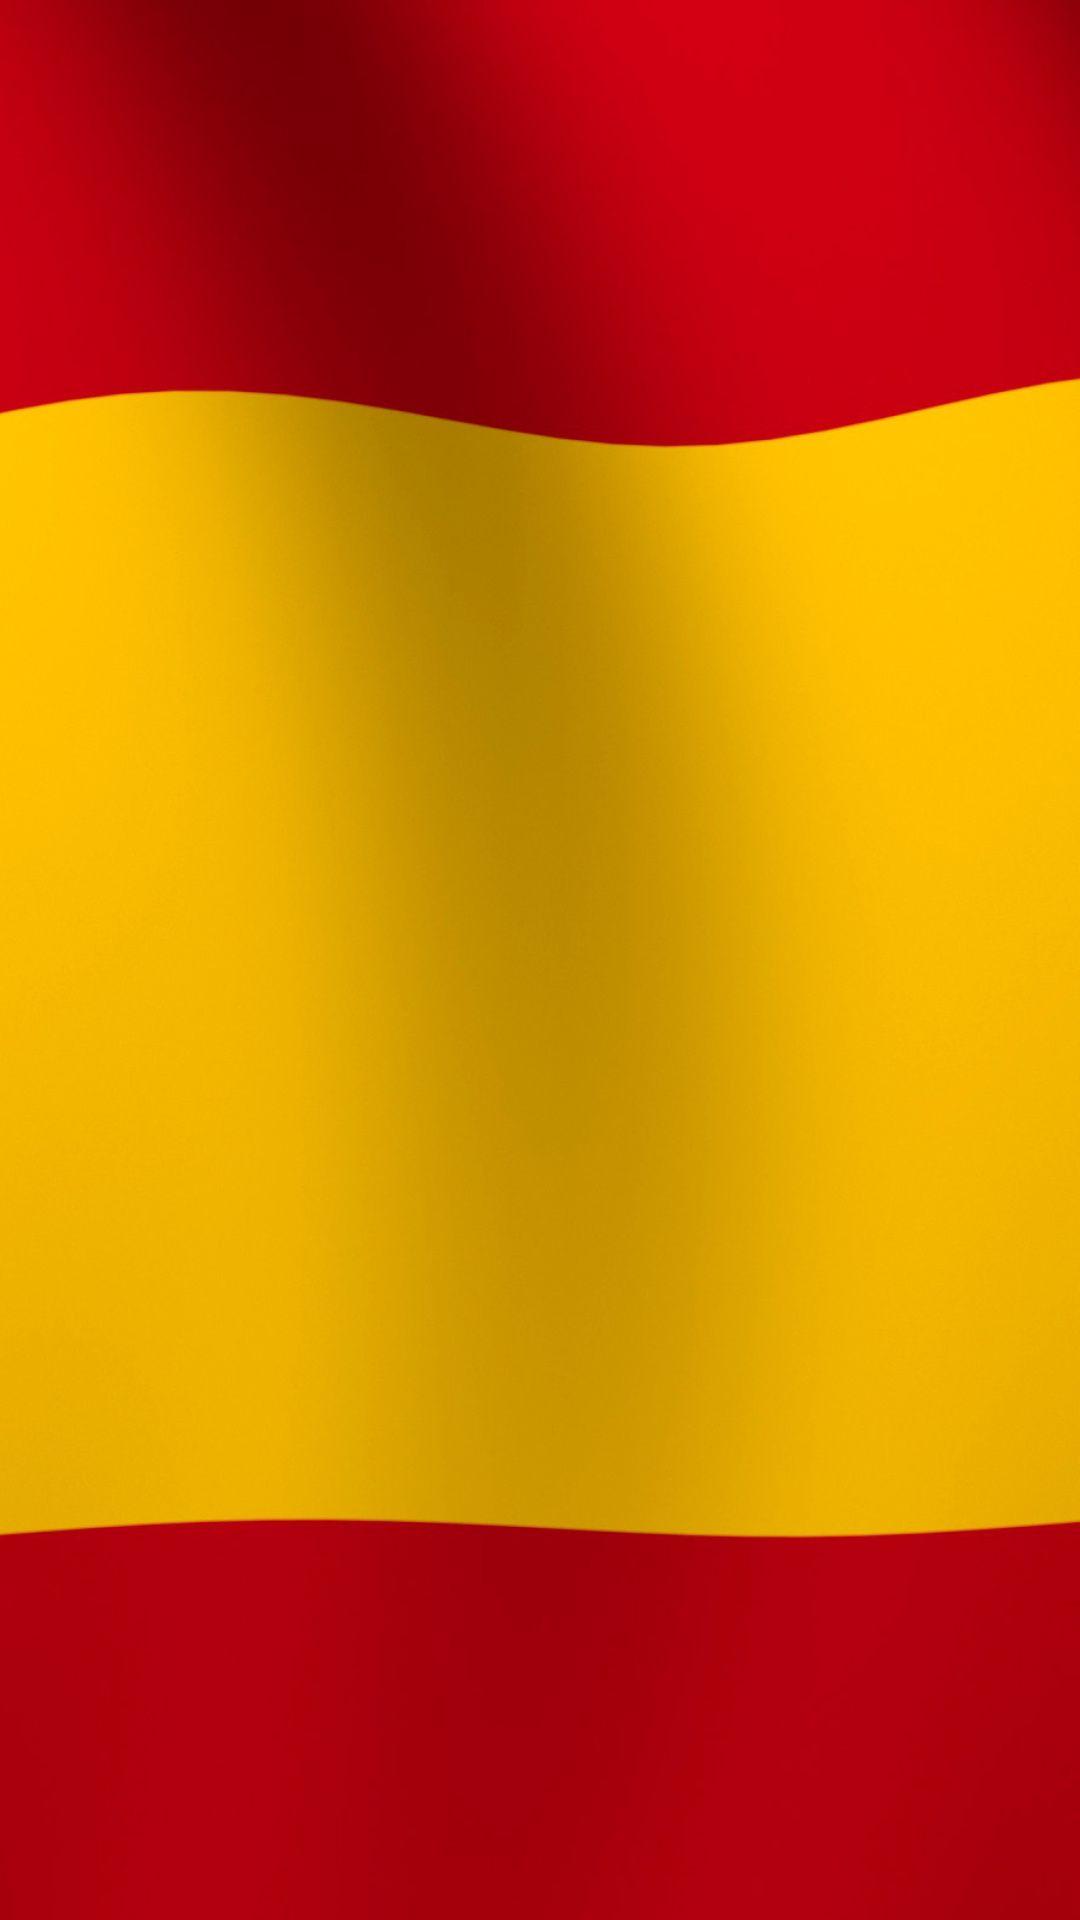 Spain flag iphone wallpapers